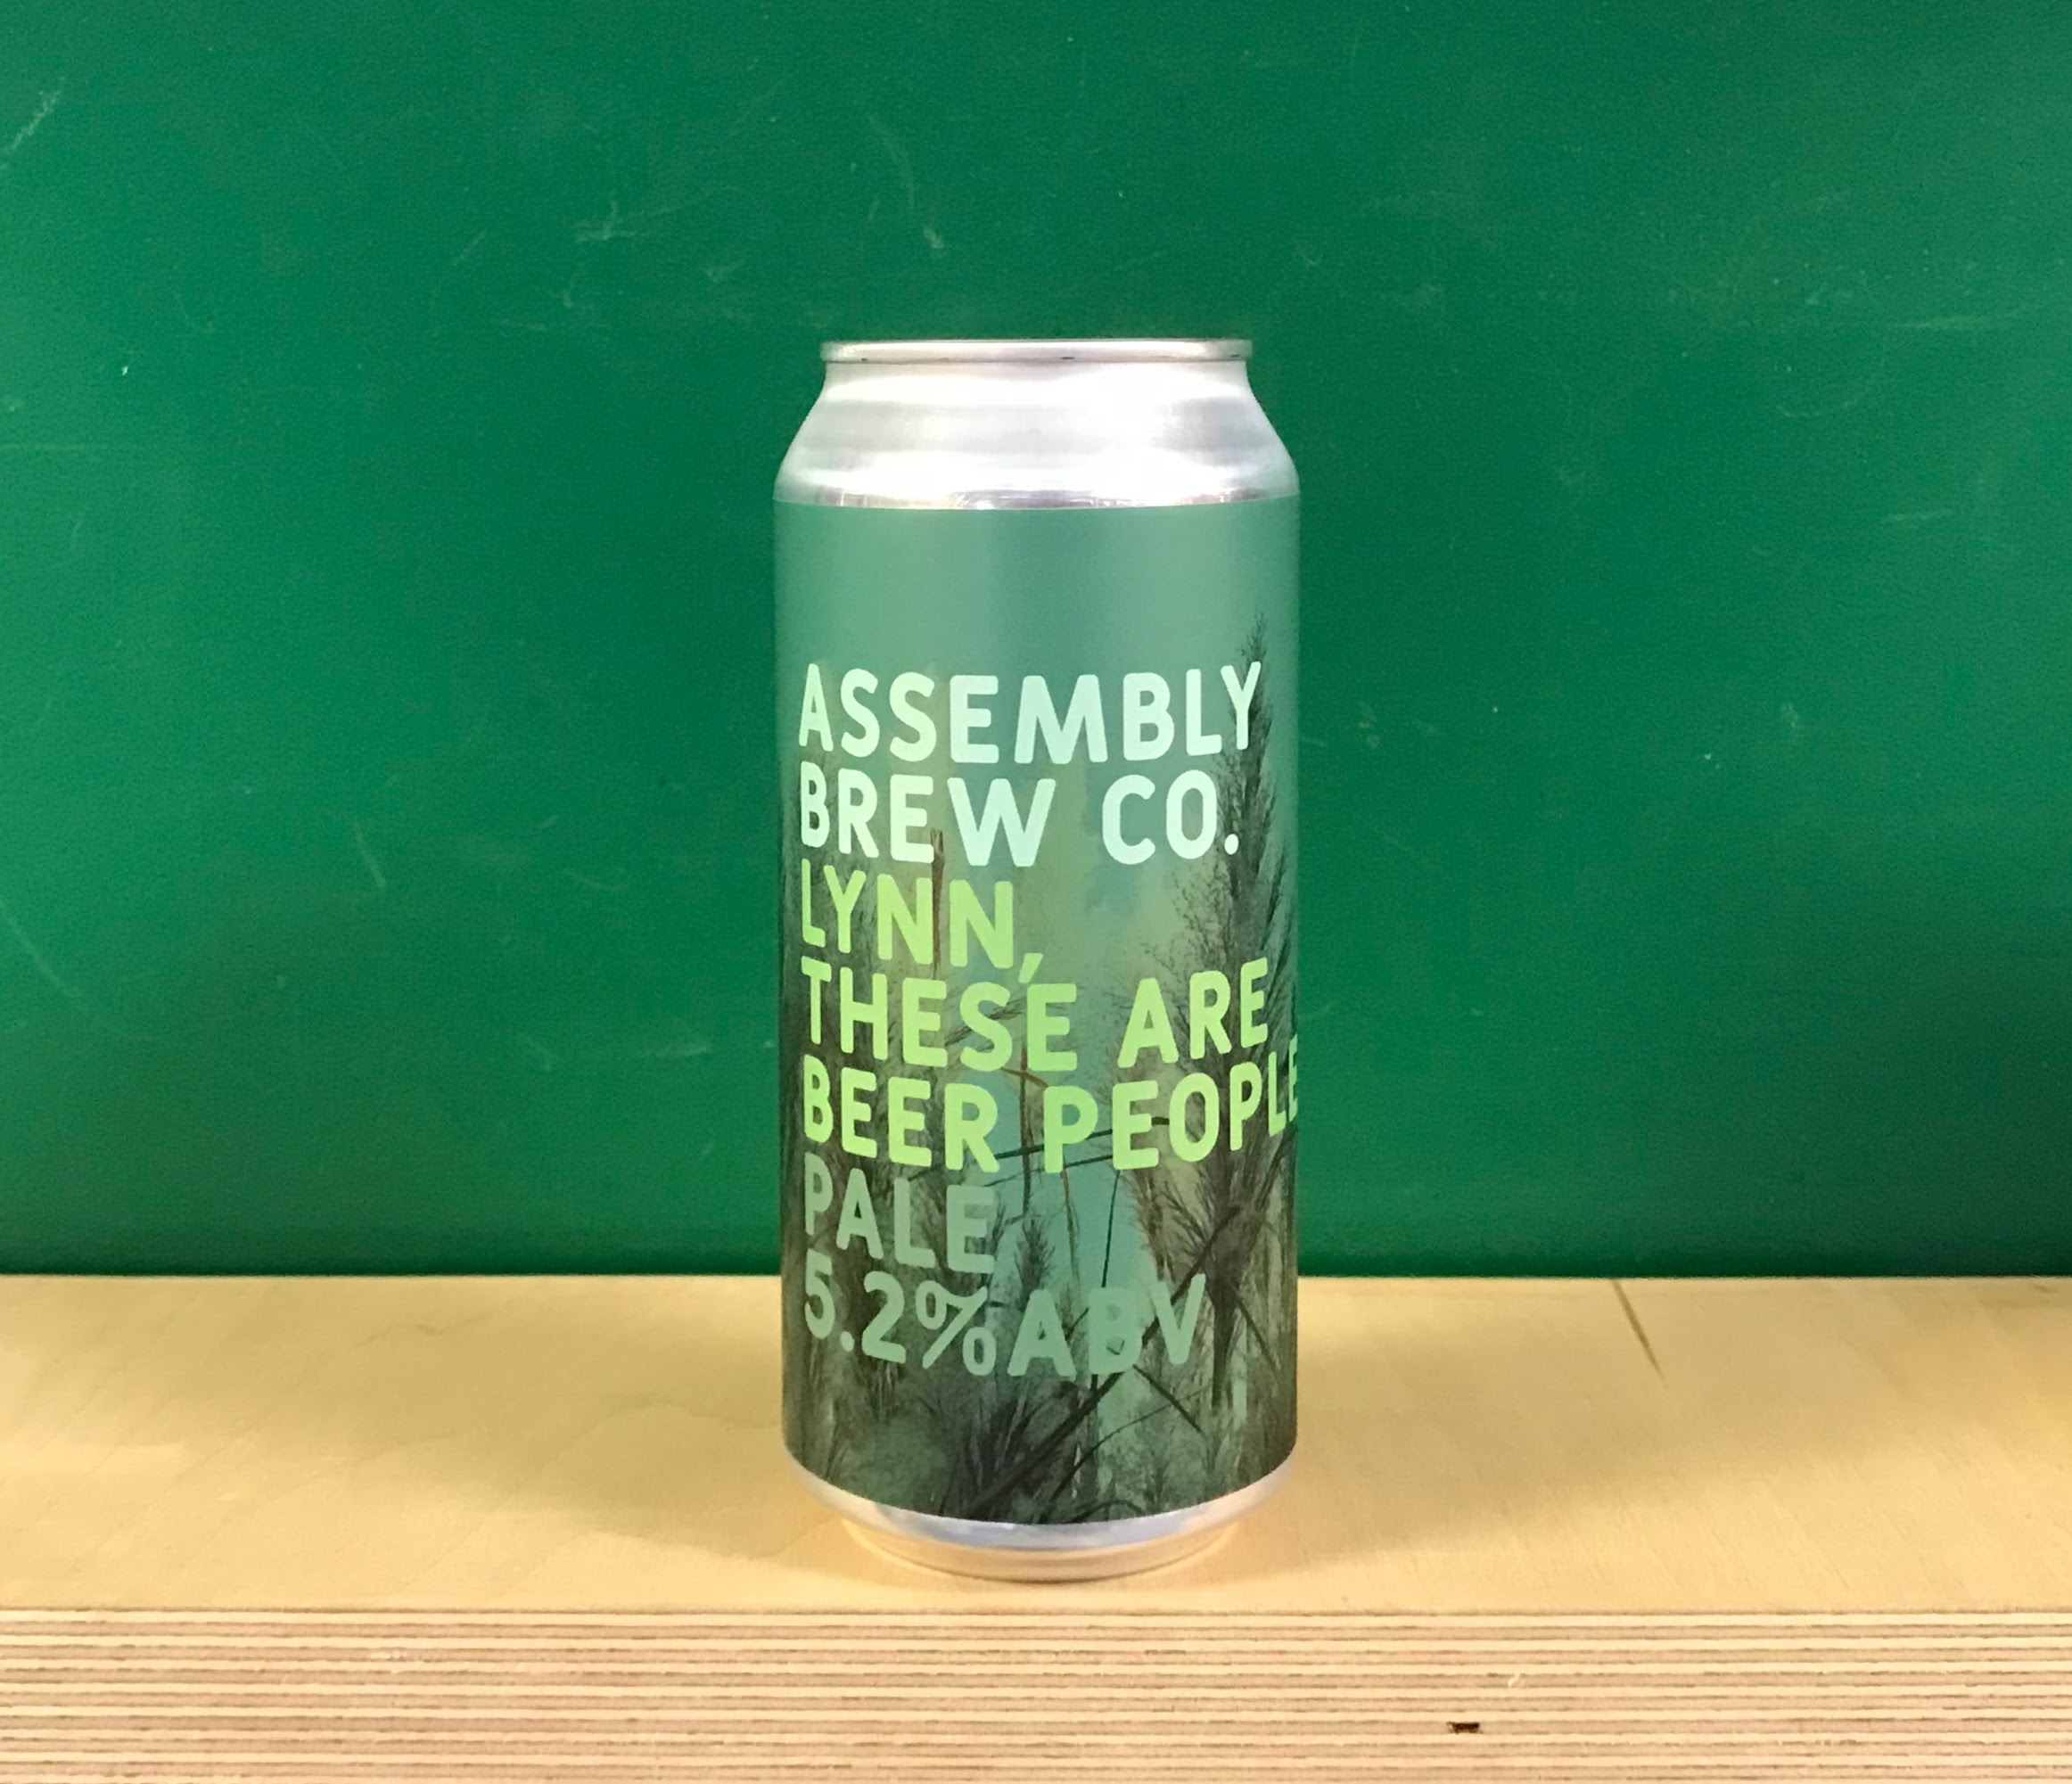 Assembly Brew Co Lynn, These Are Beer People